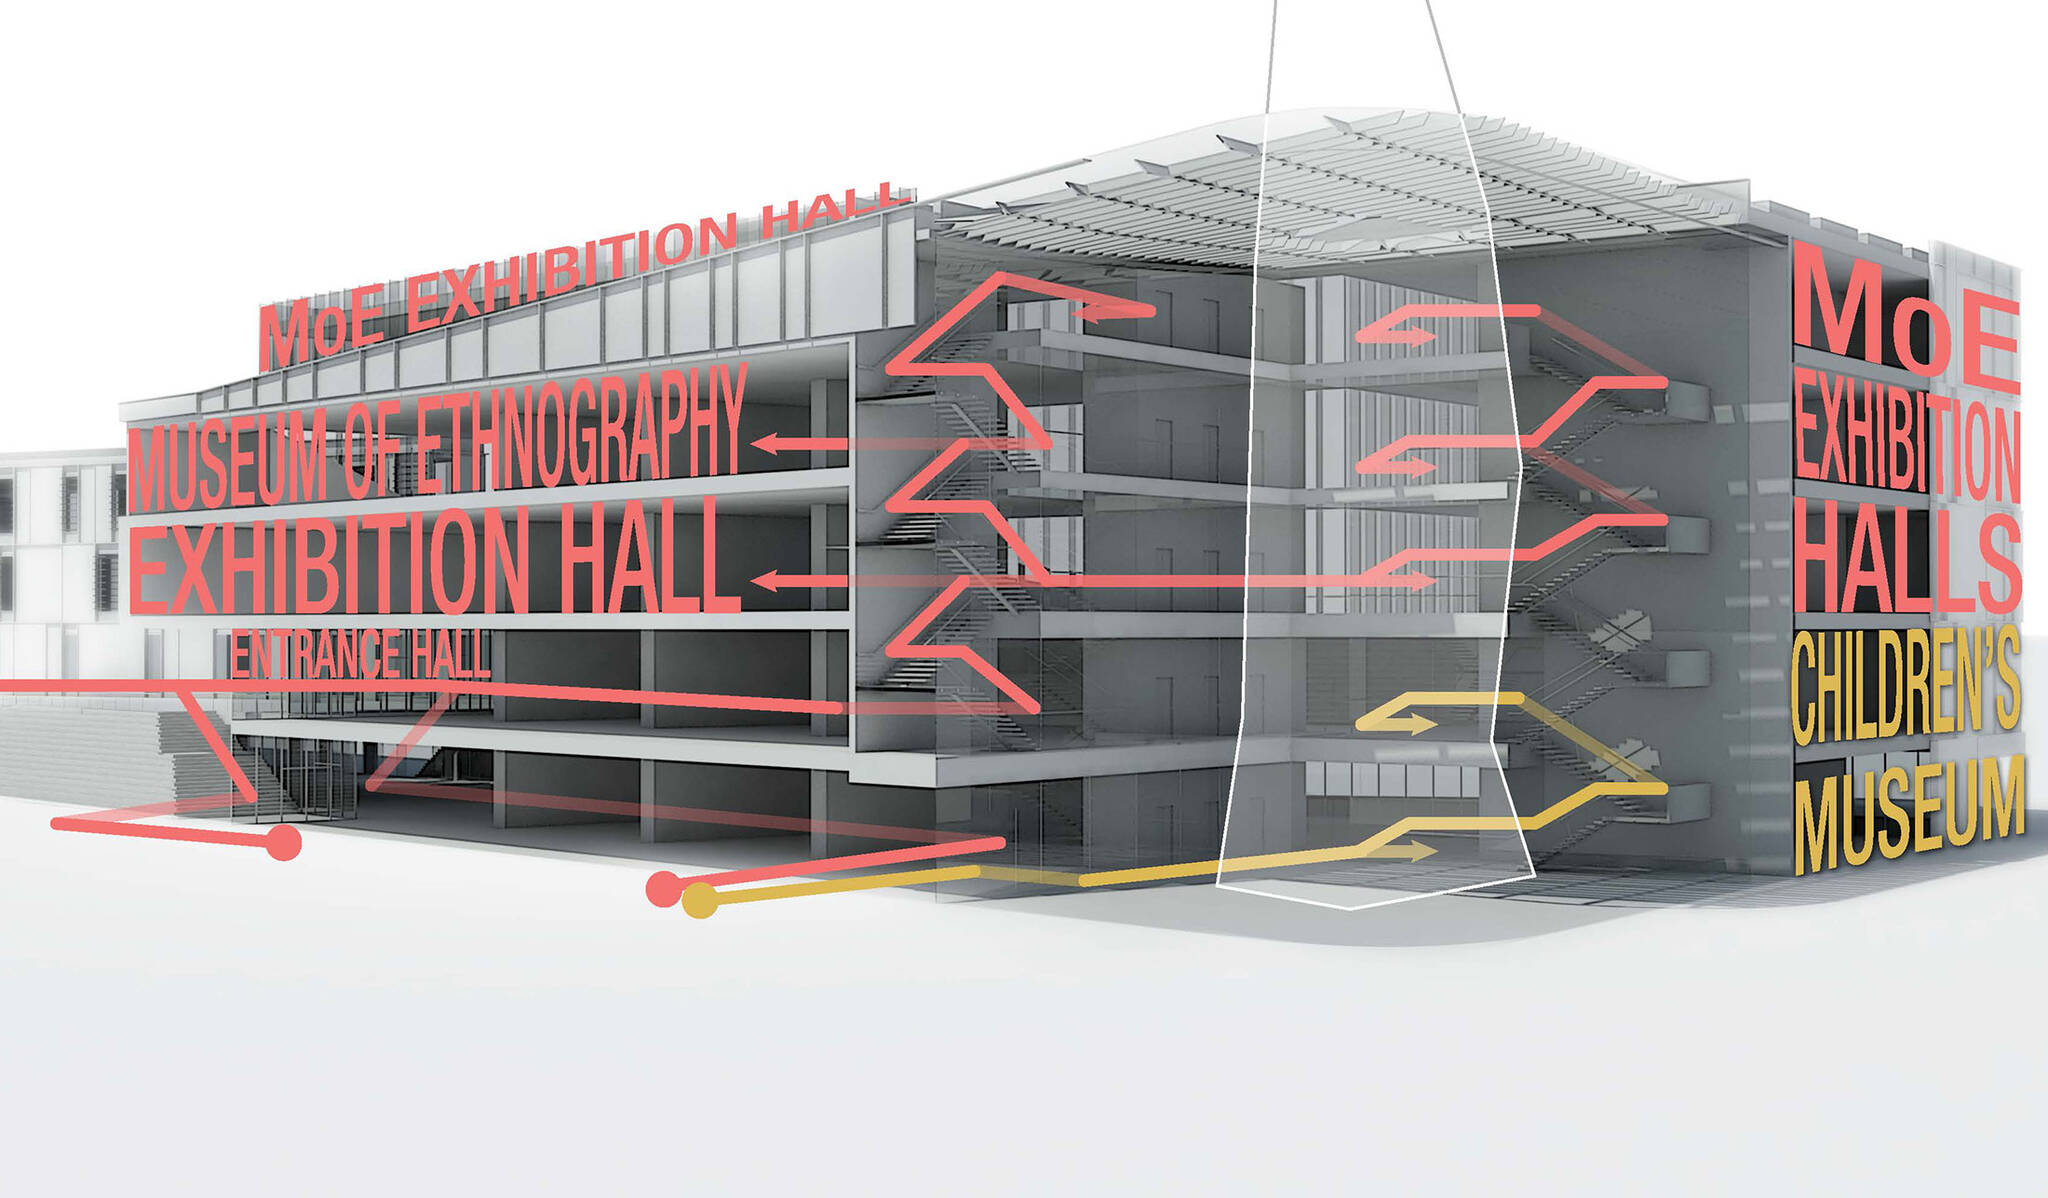 Circulation diagram of the Museum of Etnography project located in Budapest, Hungary designed by the architecture studio Danny Forster & Architecture